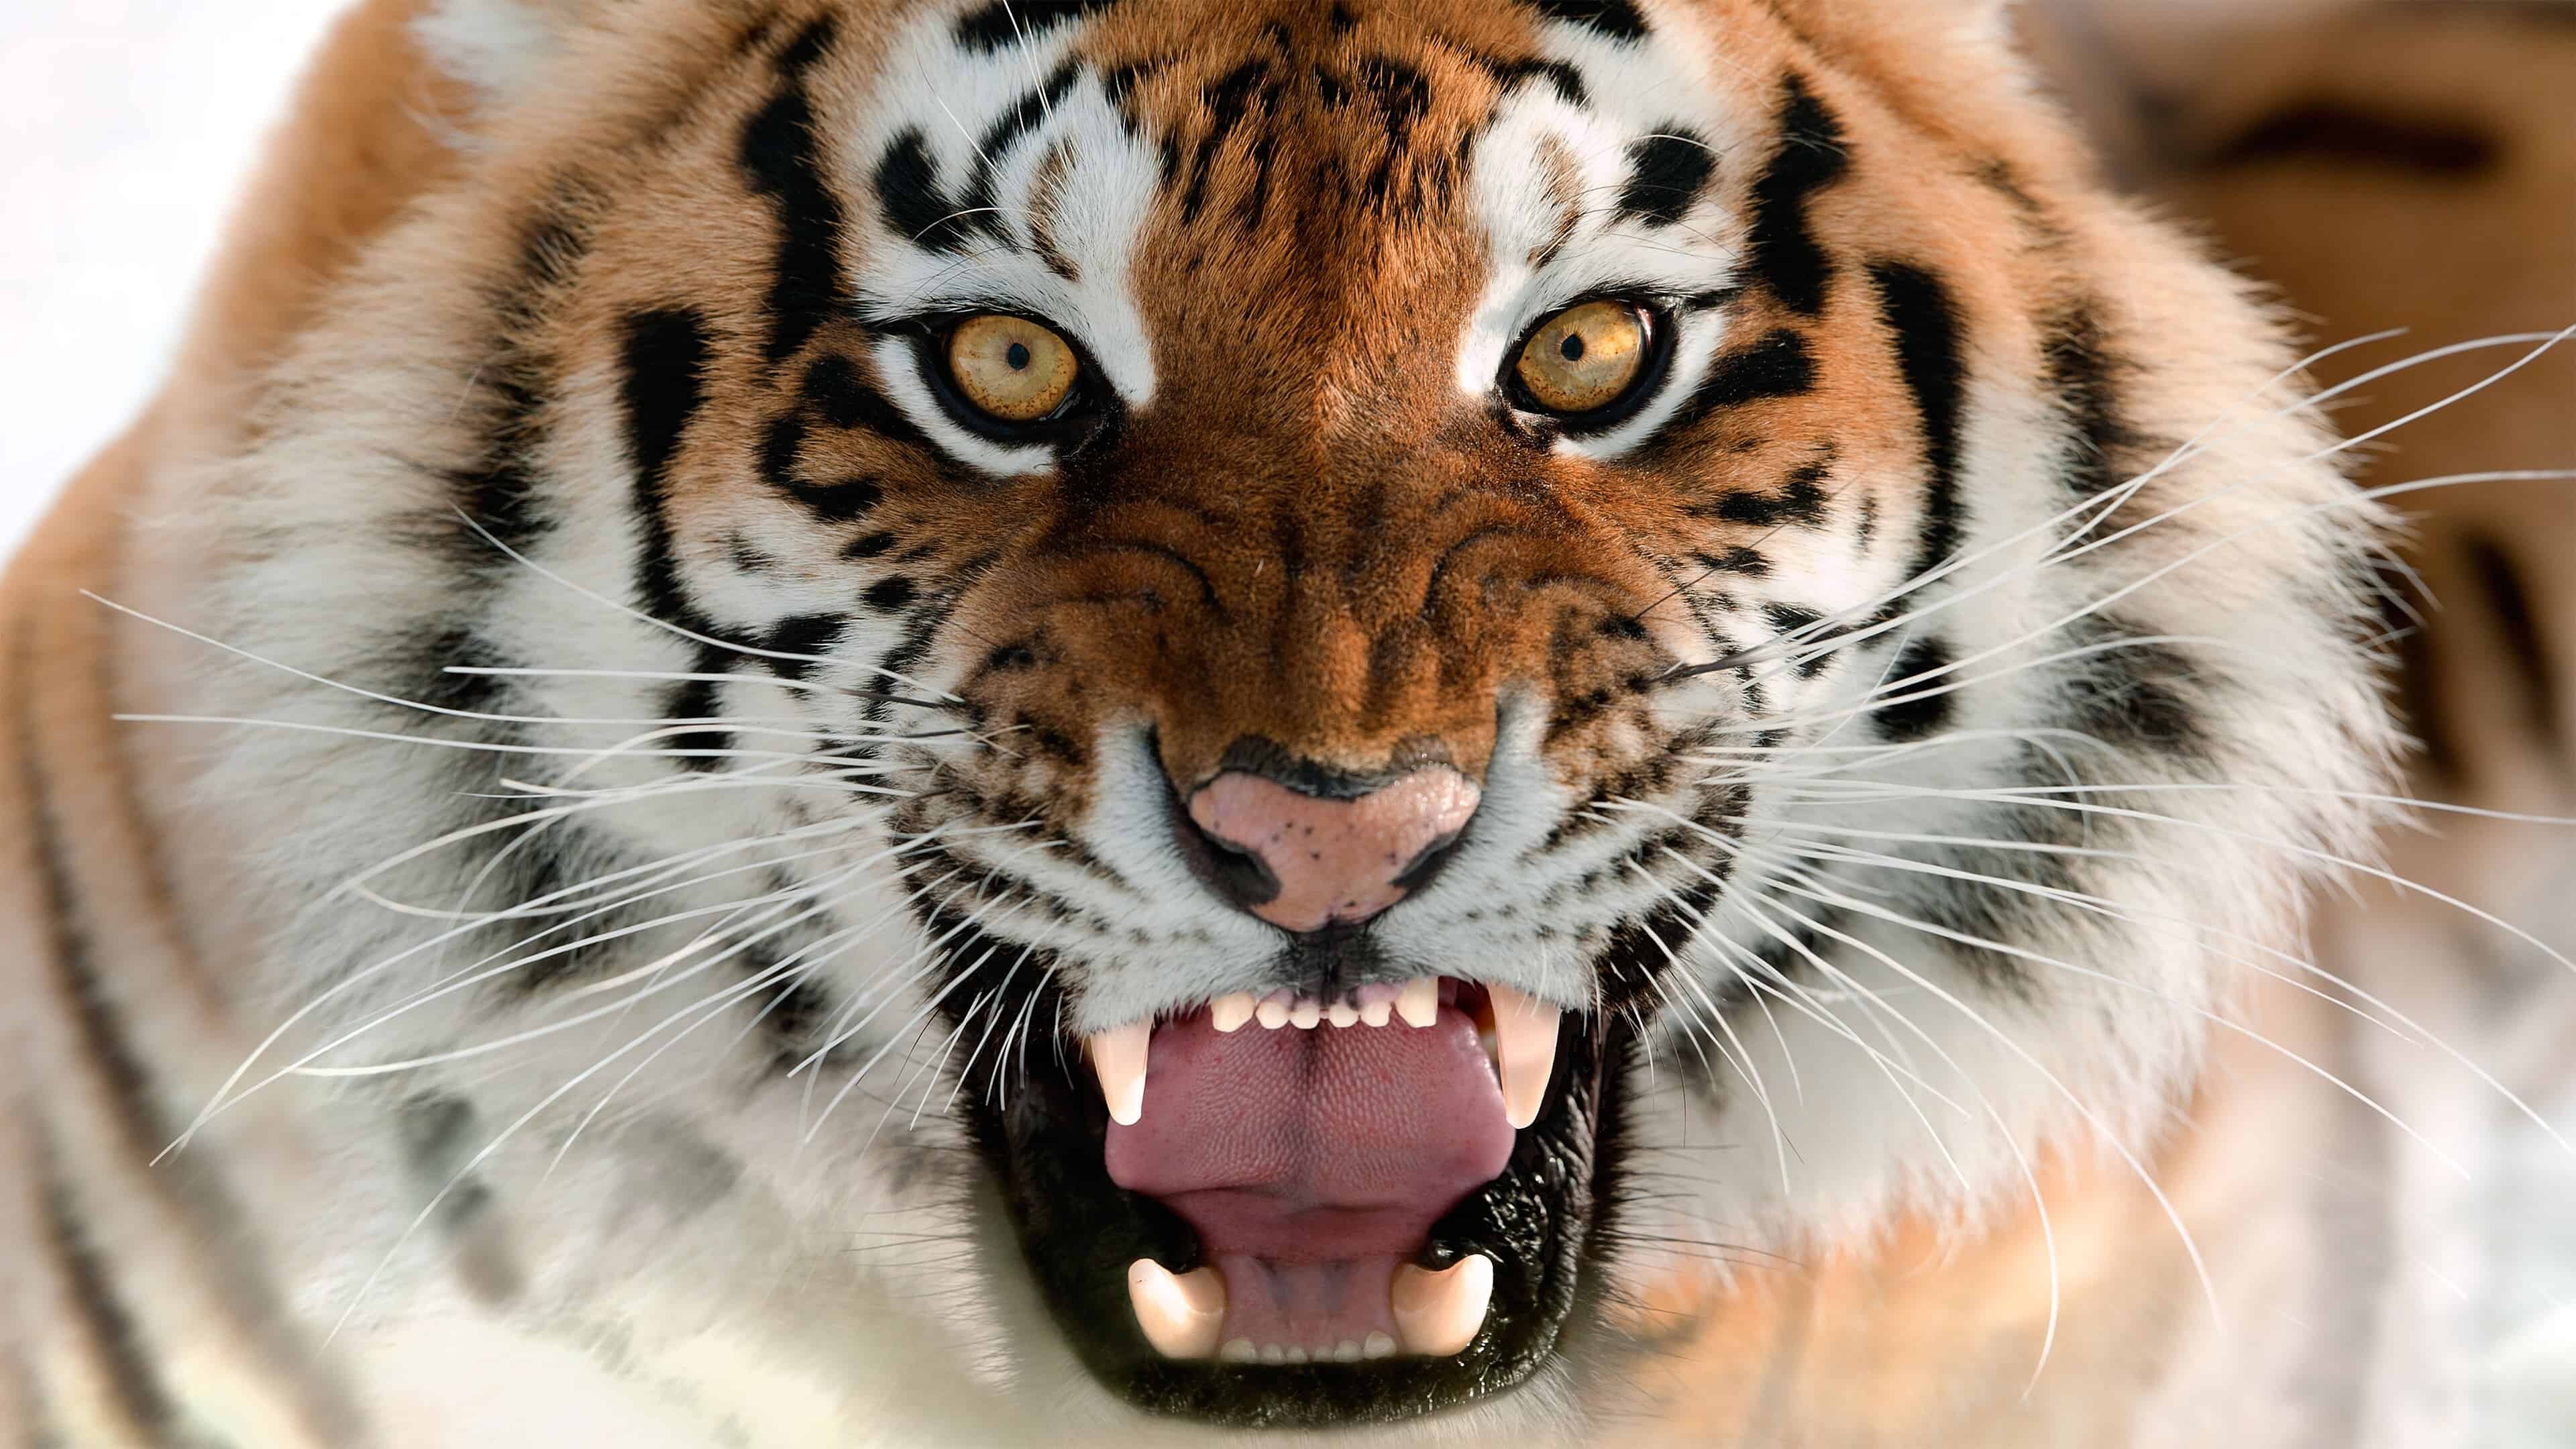 Tiger: It has a muscular body with strong forelimbs, a large head and a tail that is about half the length of its body. 3840x2160 4K Wallpaper.